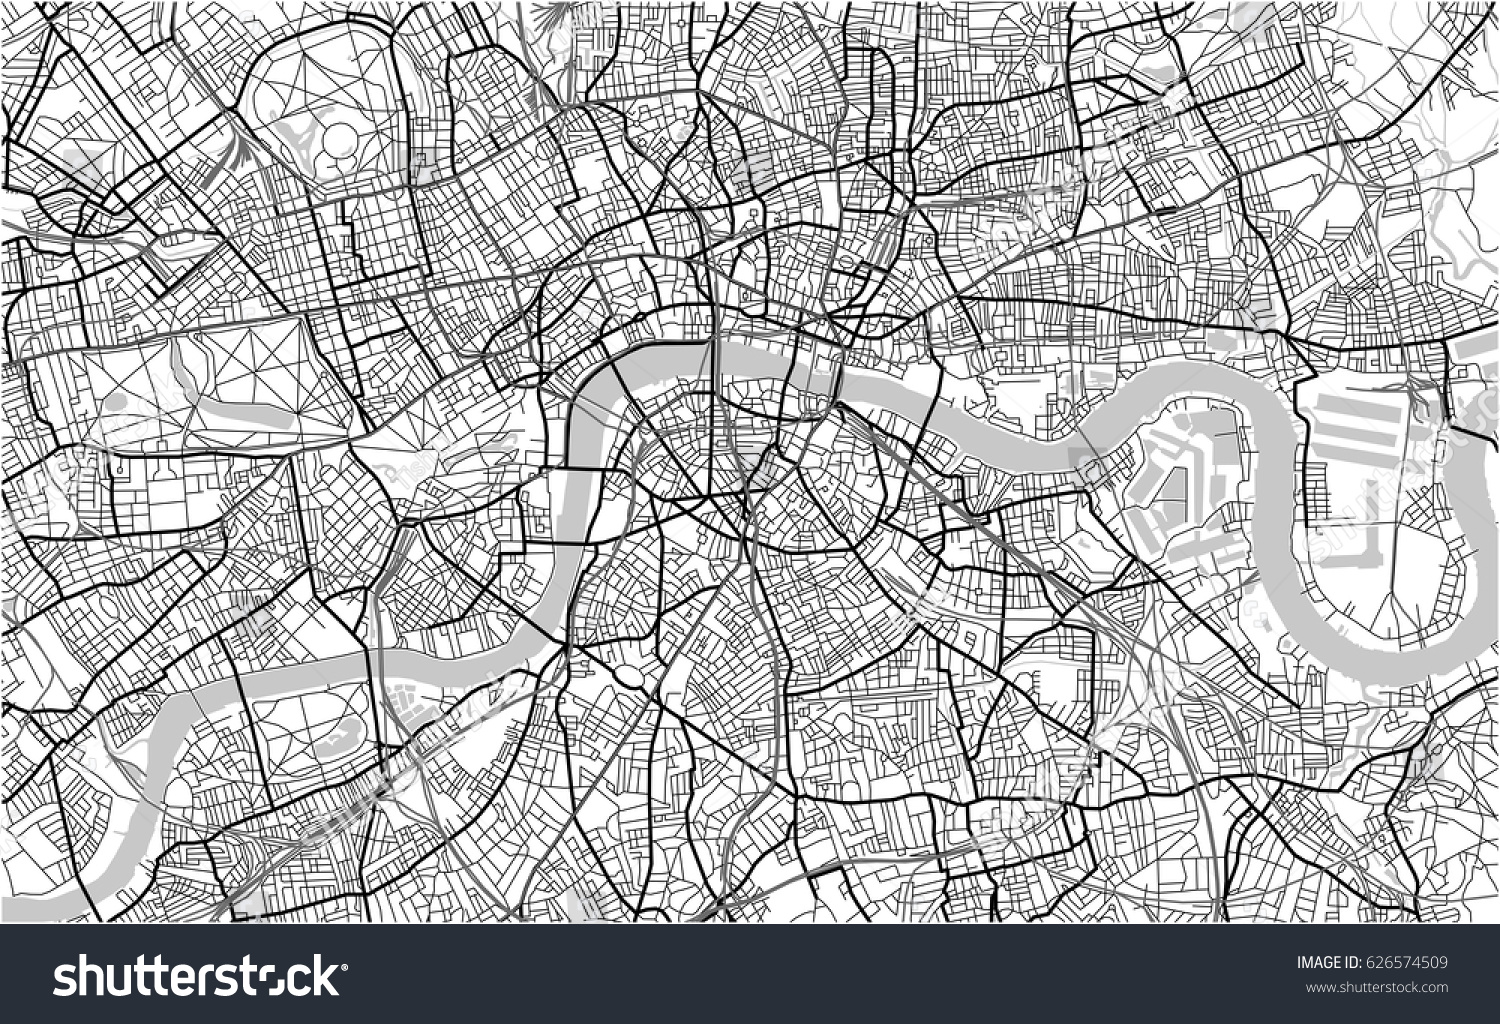 SVG of vector map of the city of London, Great Britain svg